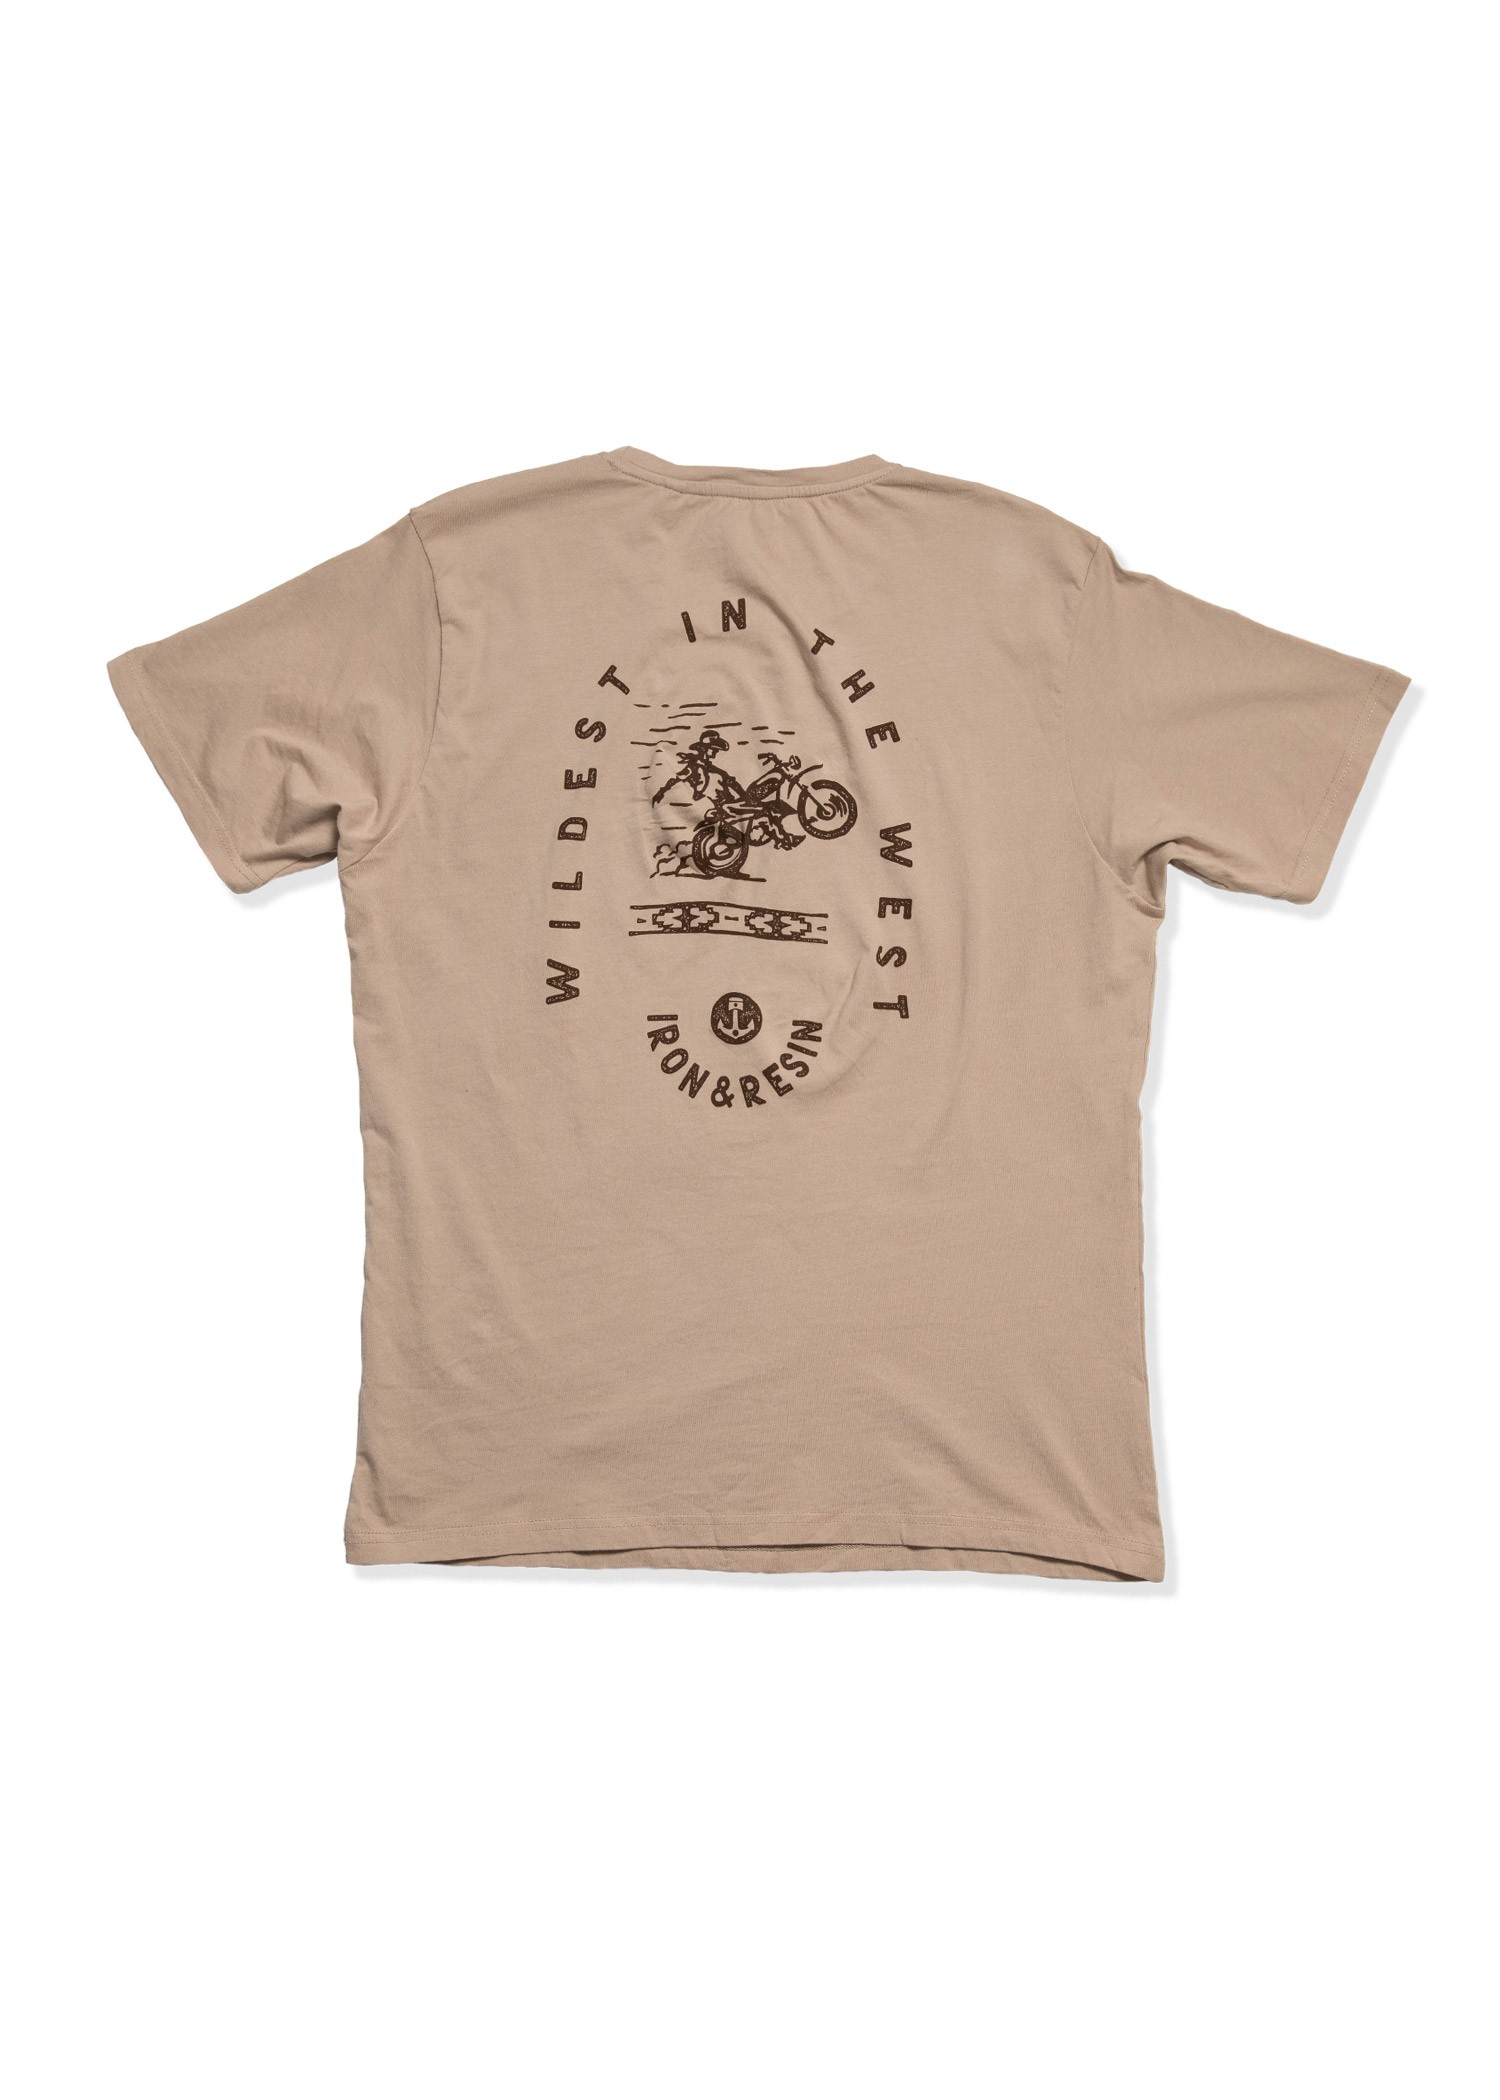 Wildest in the west - T-shirt homme homme - IRON & RESIN